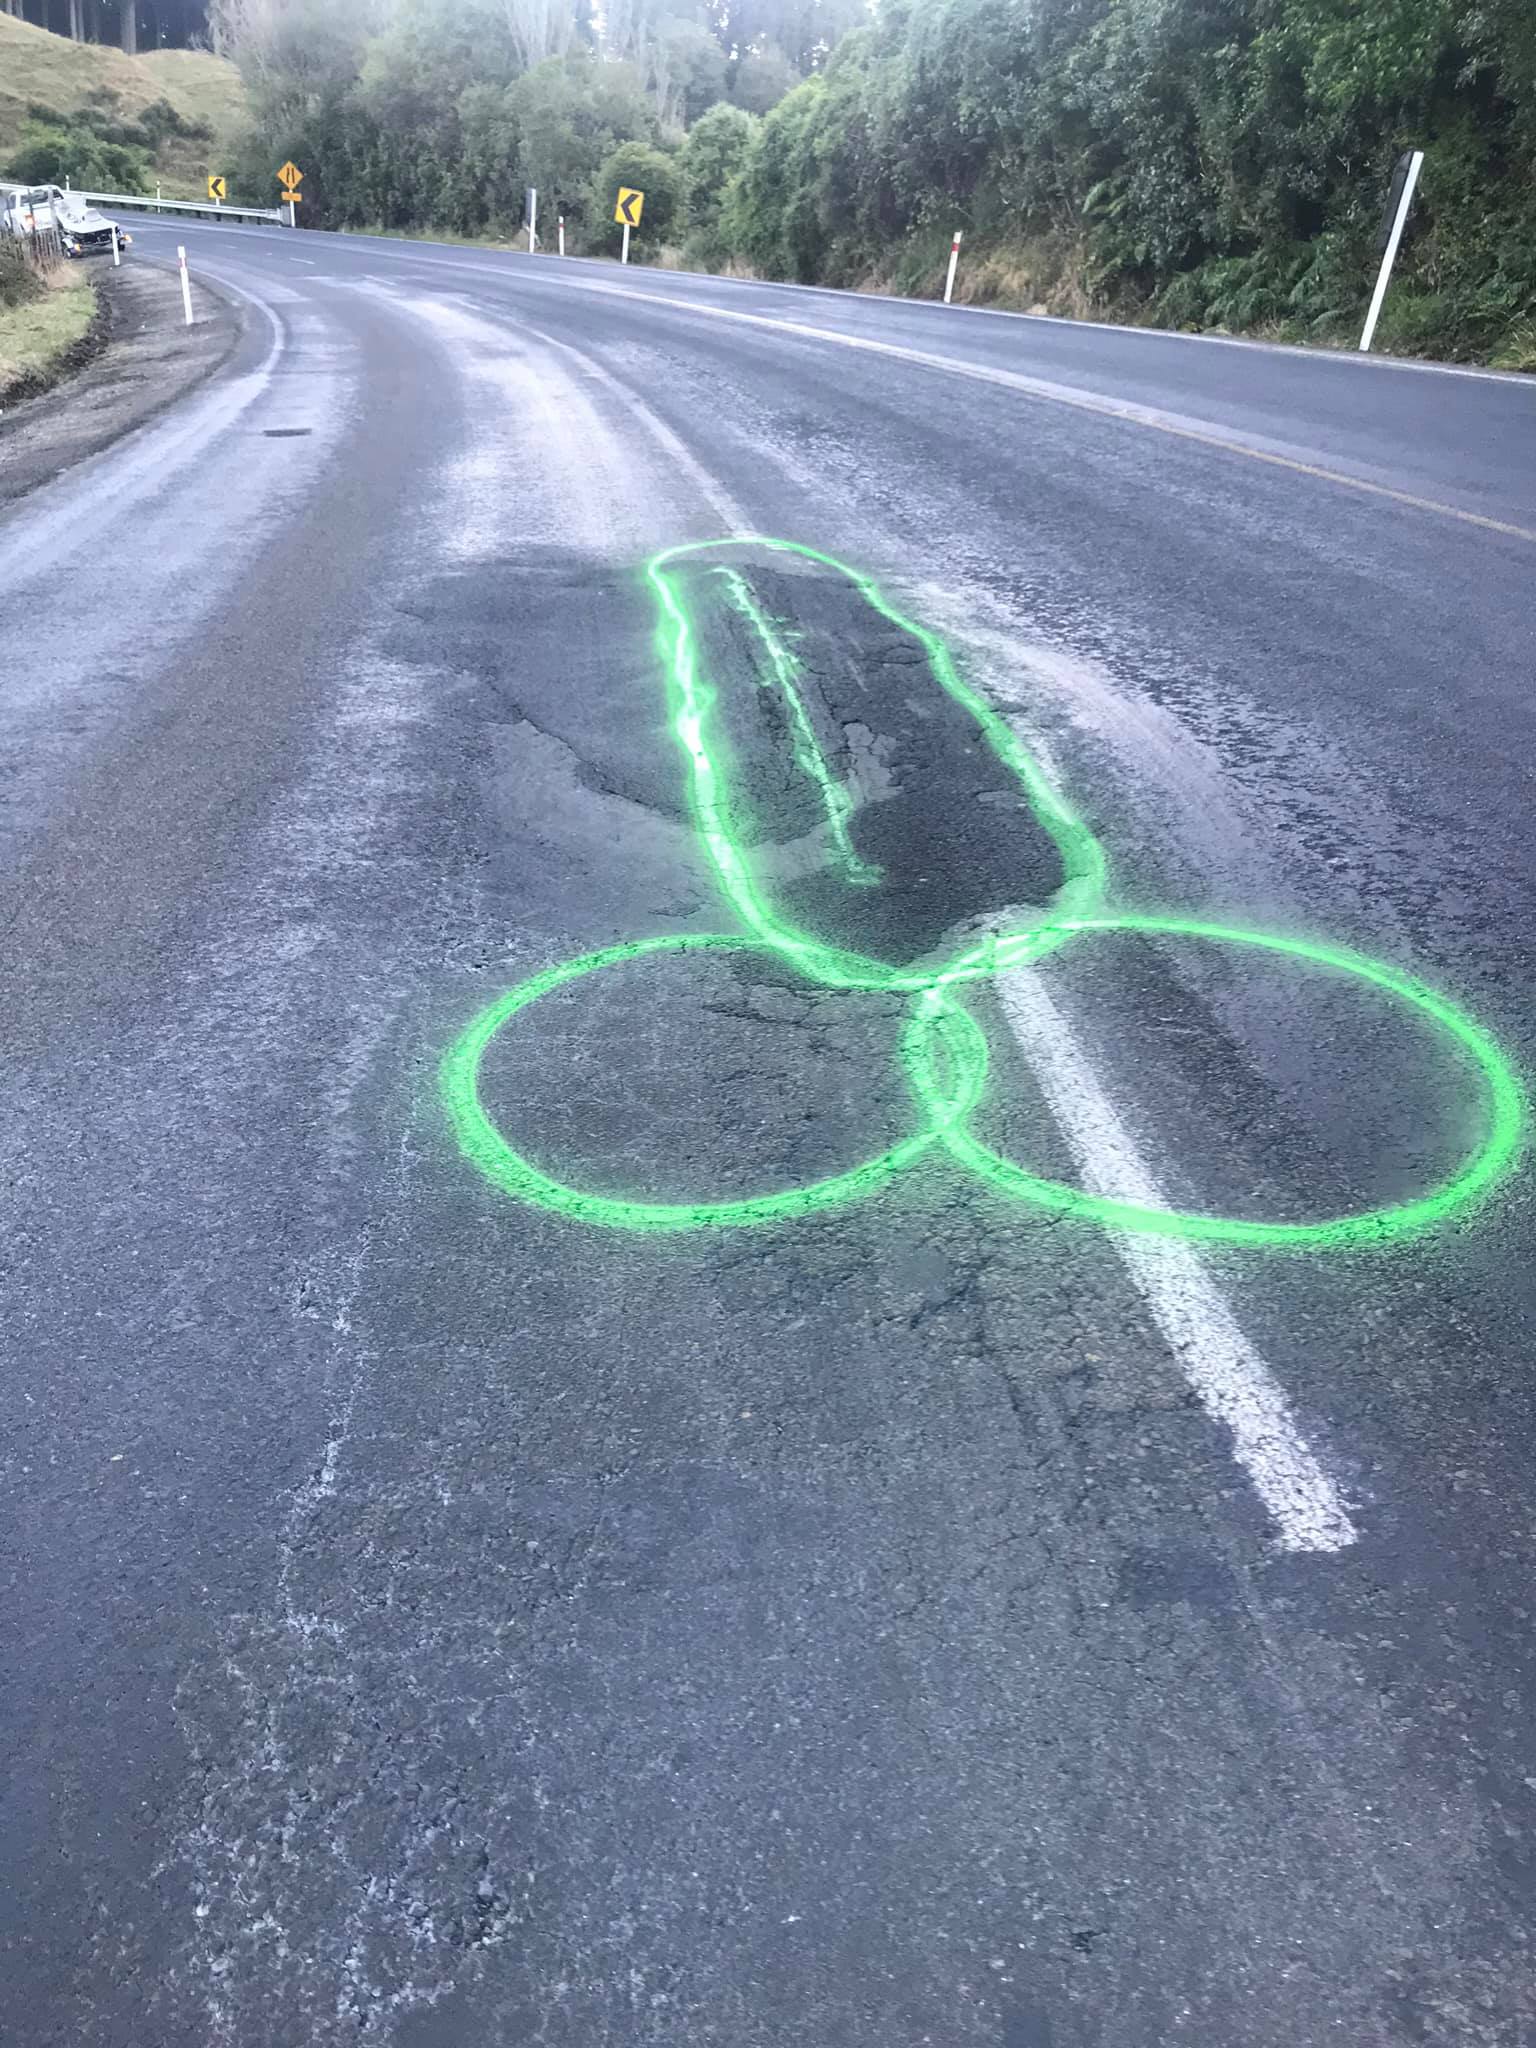 Geoff Upson faces legal action for drawing penises around potholes in Auckland.